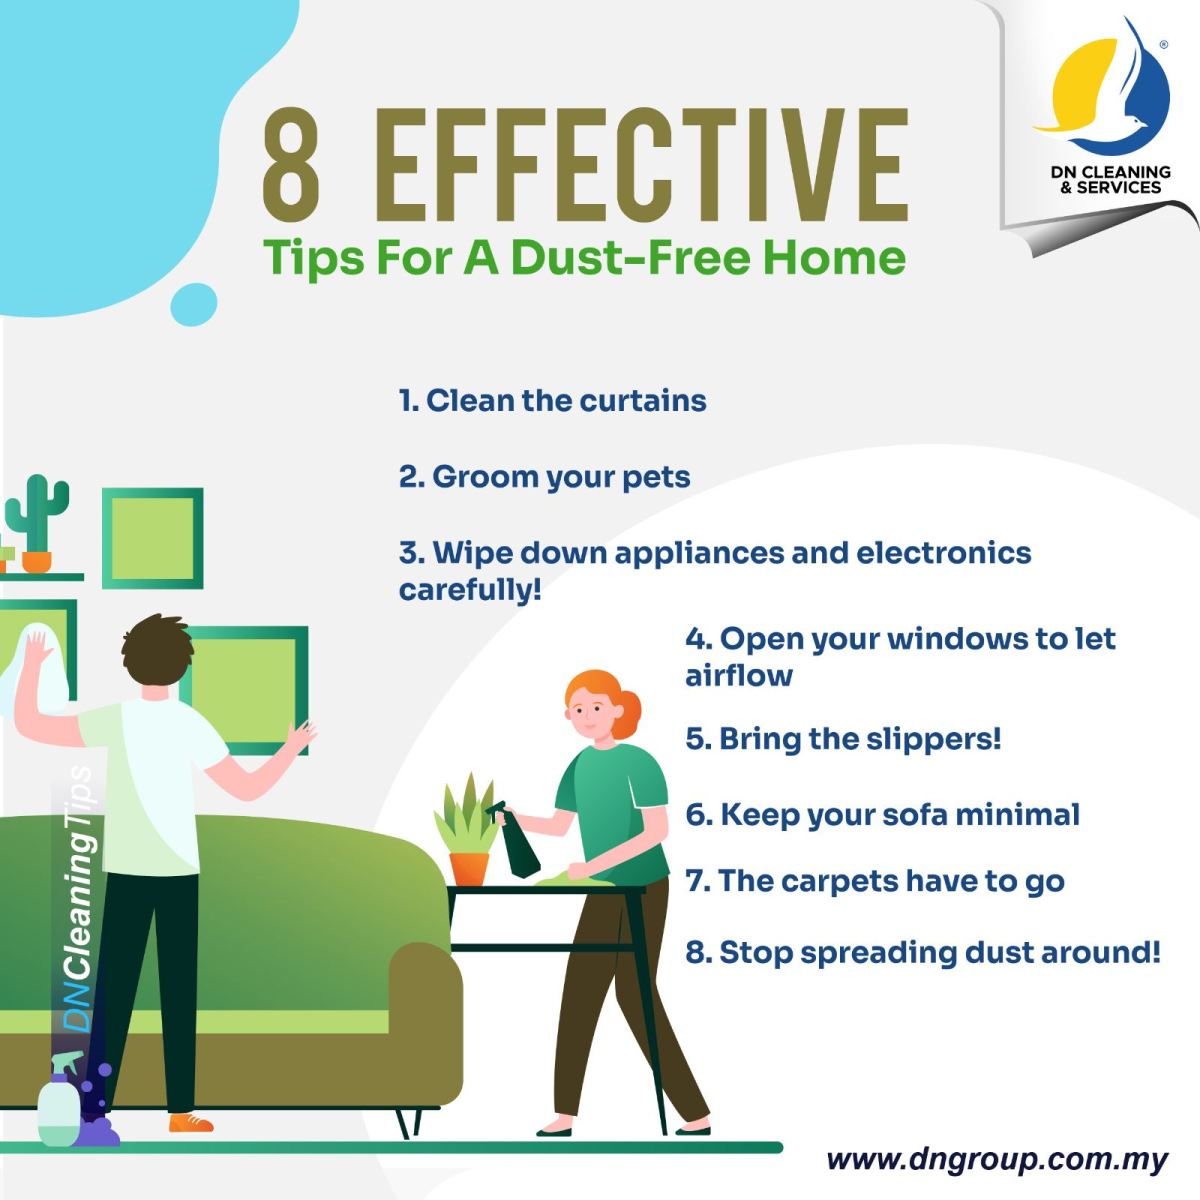 8 Effective Tips For A Dust-Free Home